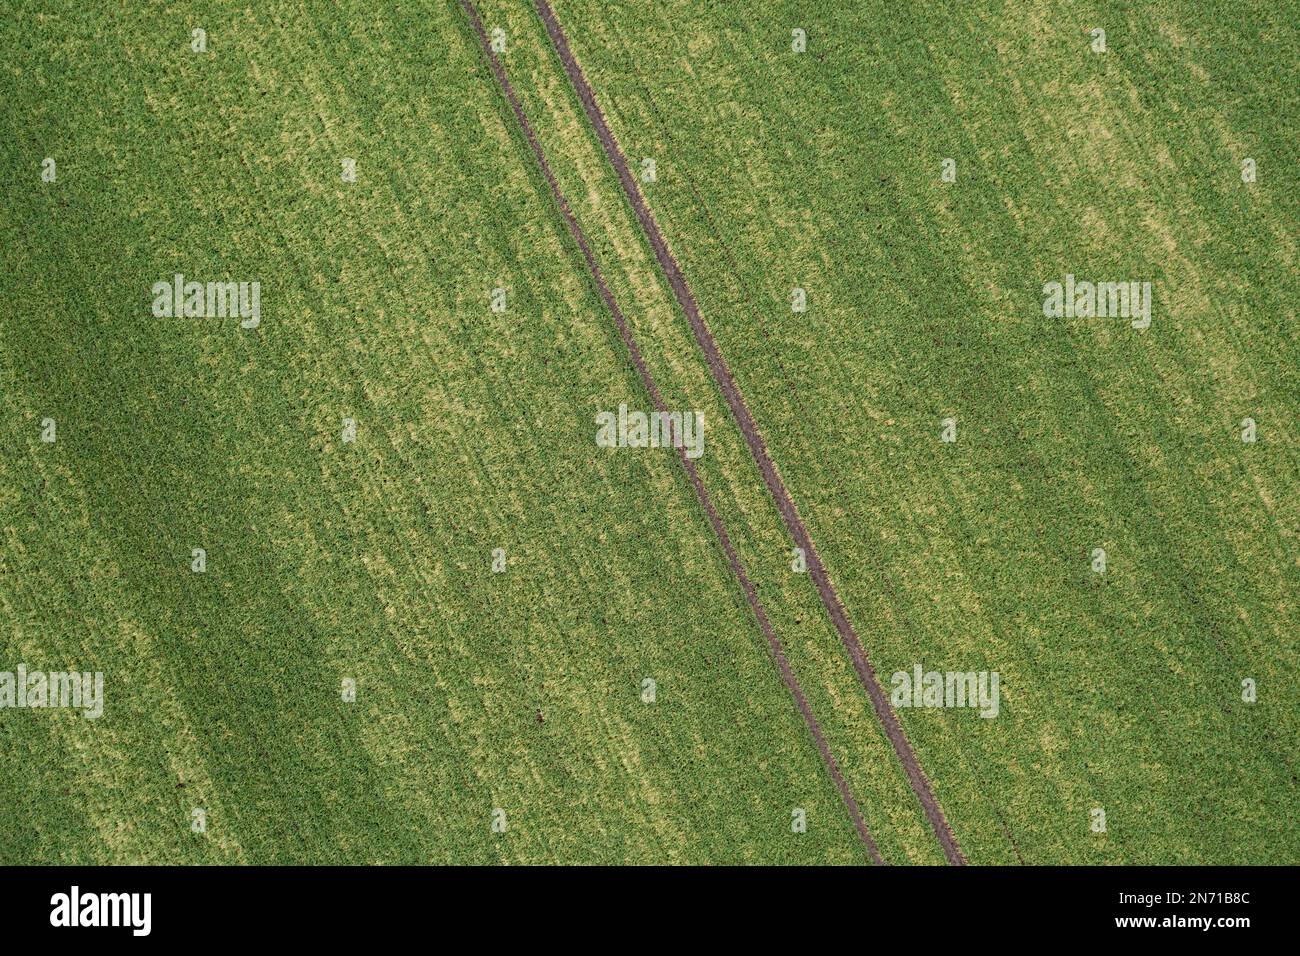 Field with winter cereals and ruts, Germany Stock Photo